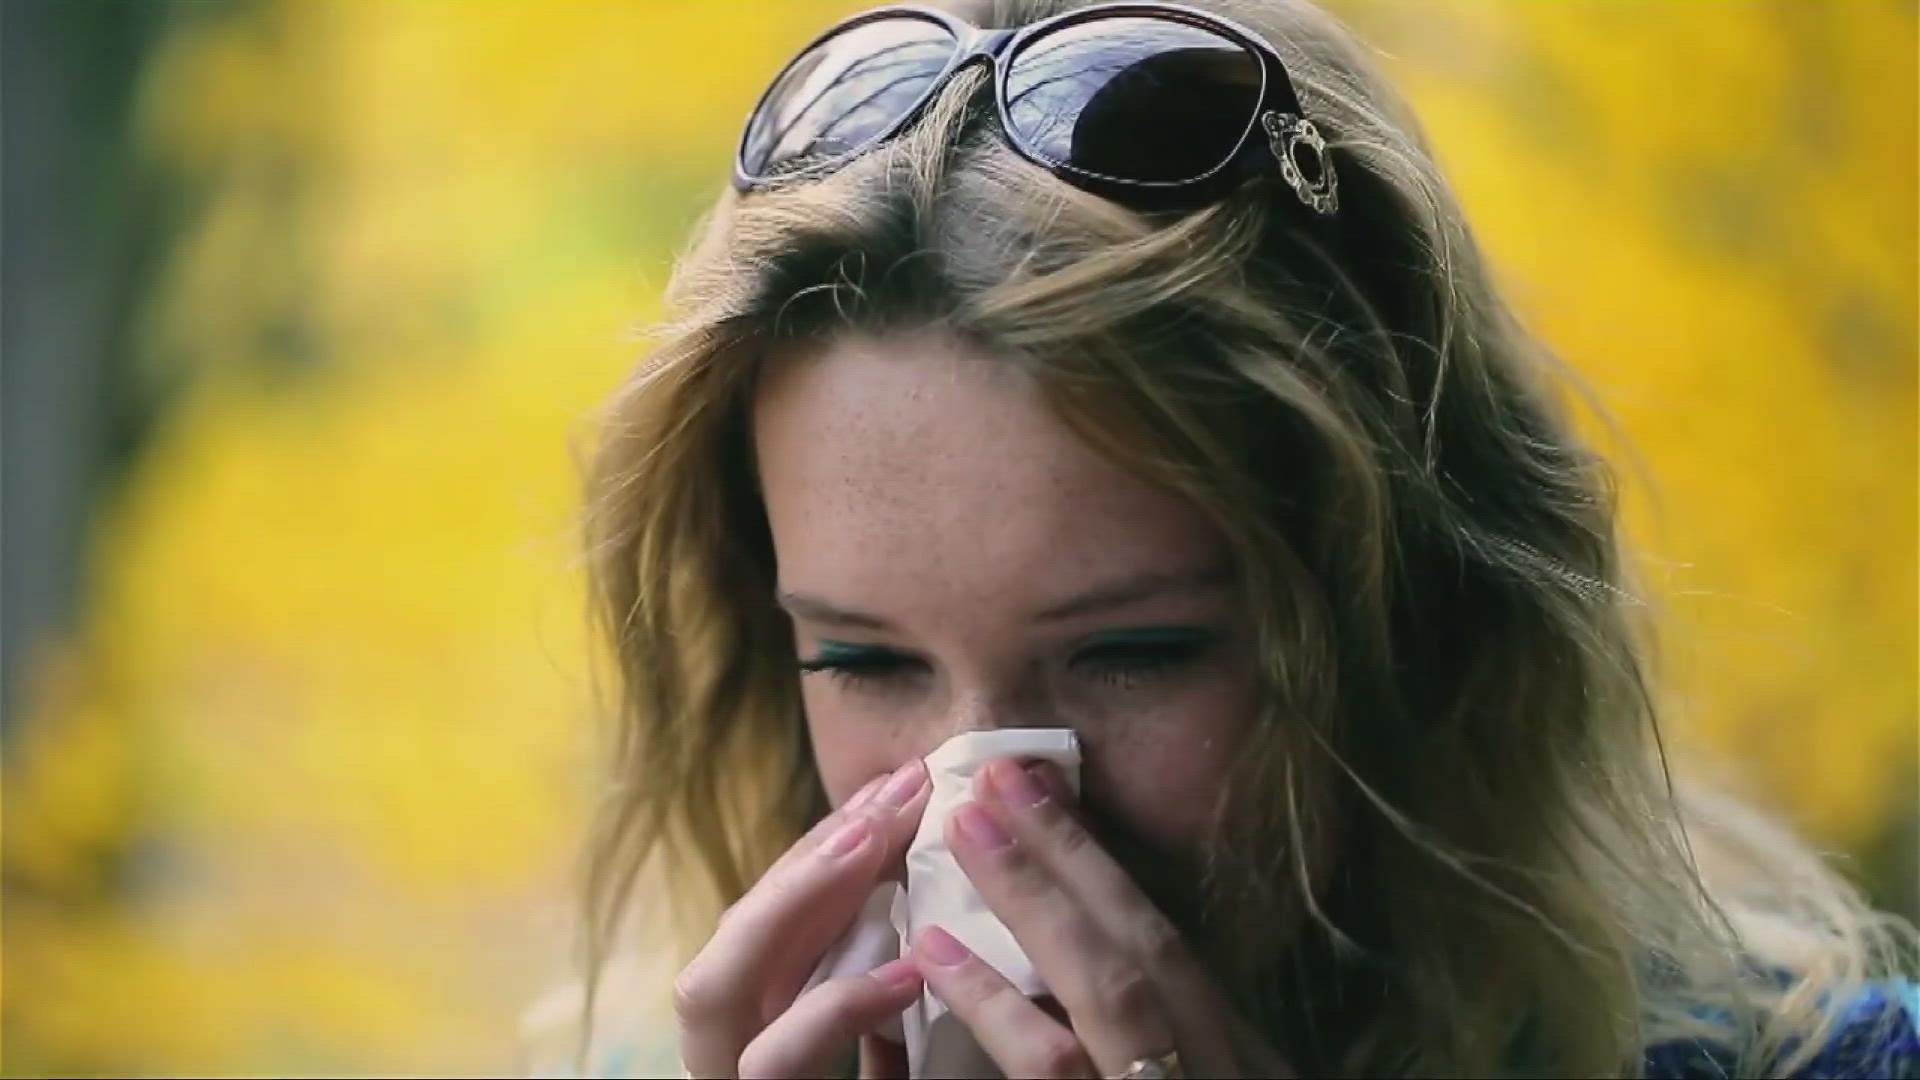 Warmer weather is great for the mood, but it's also bringing on allergy season a bit sooner.